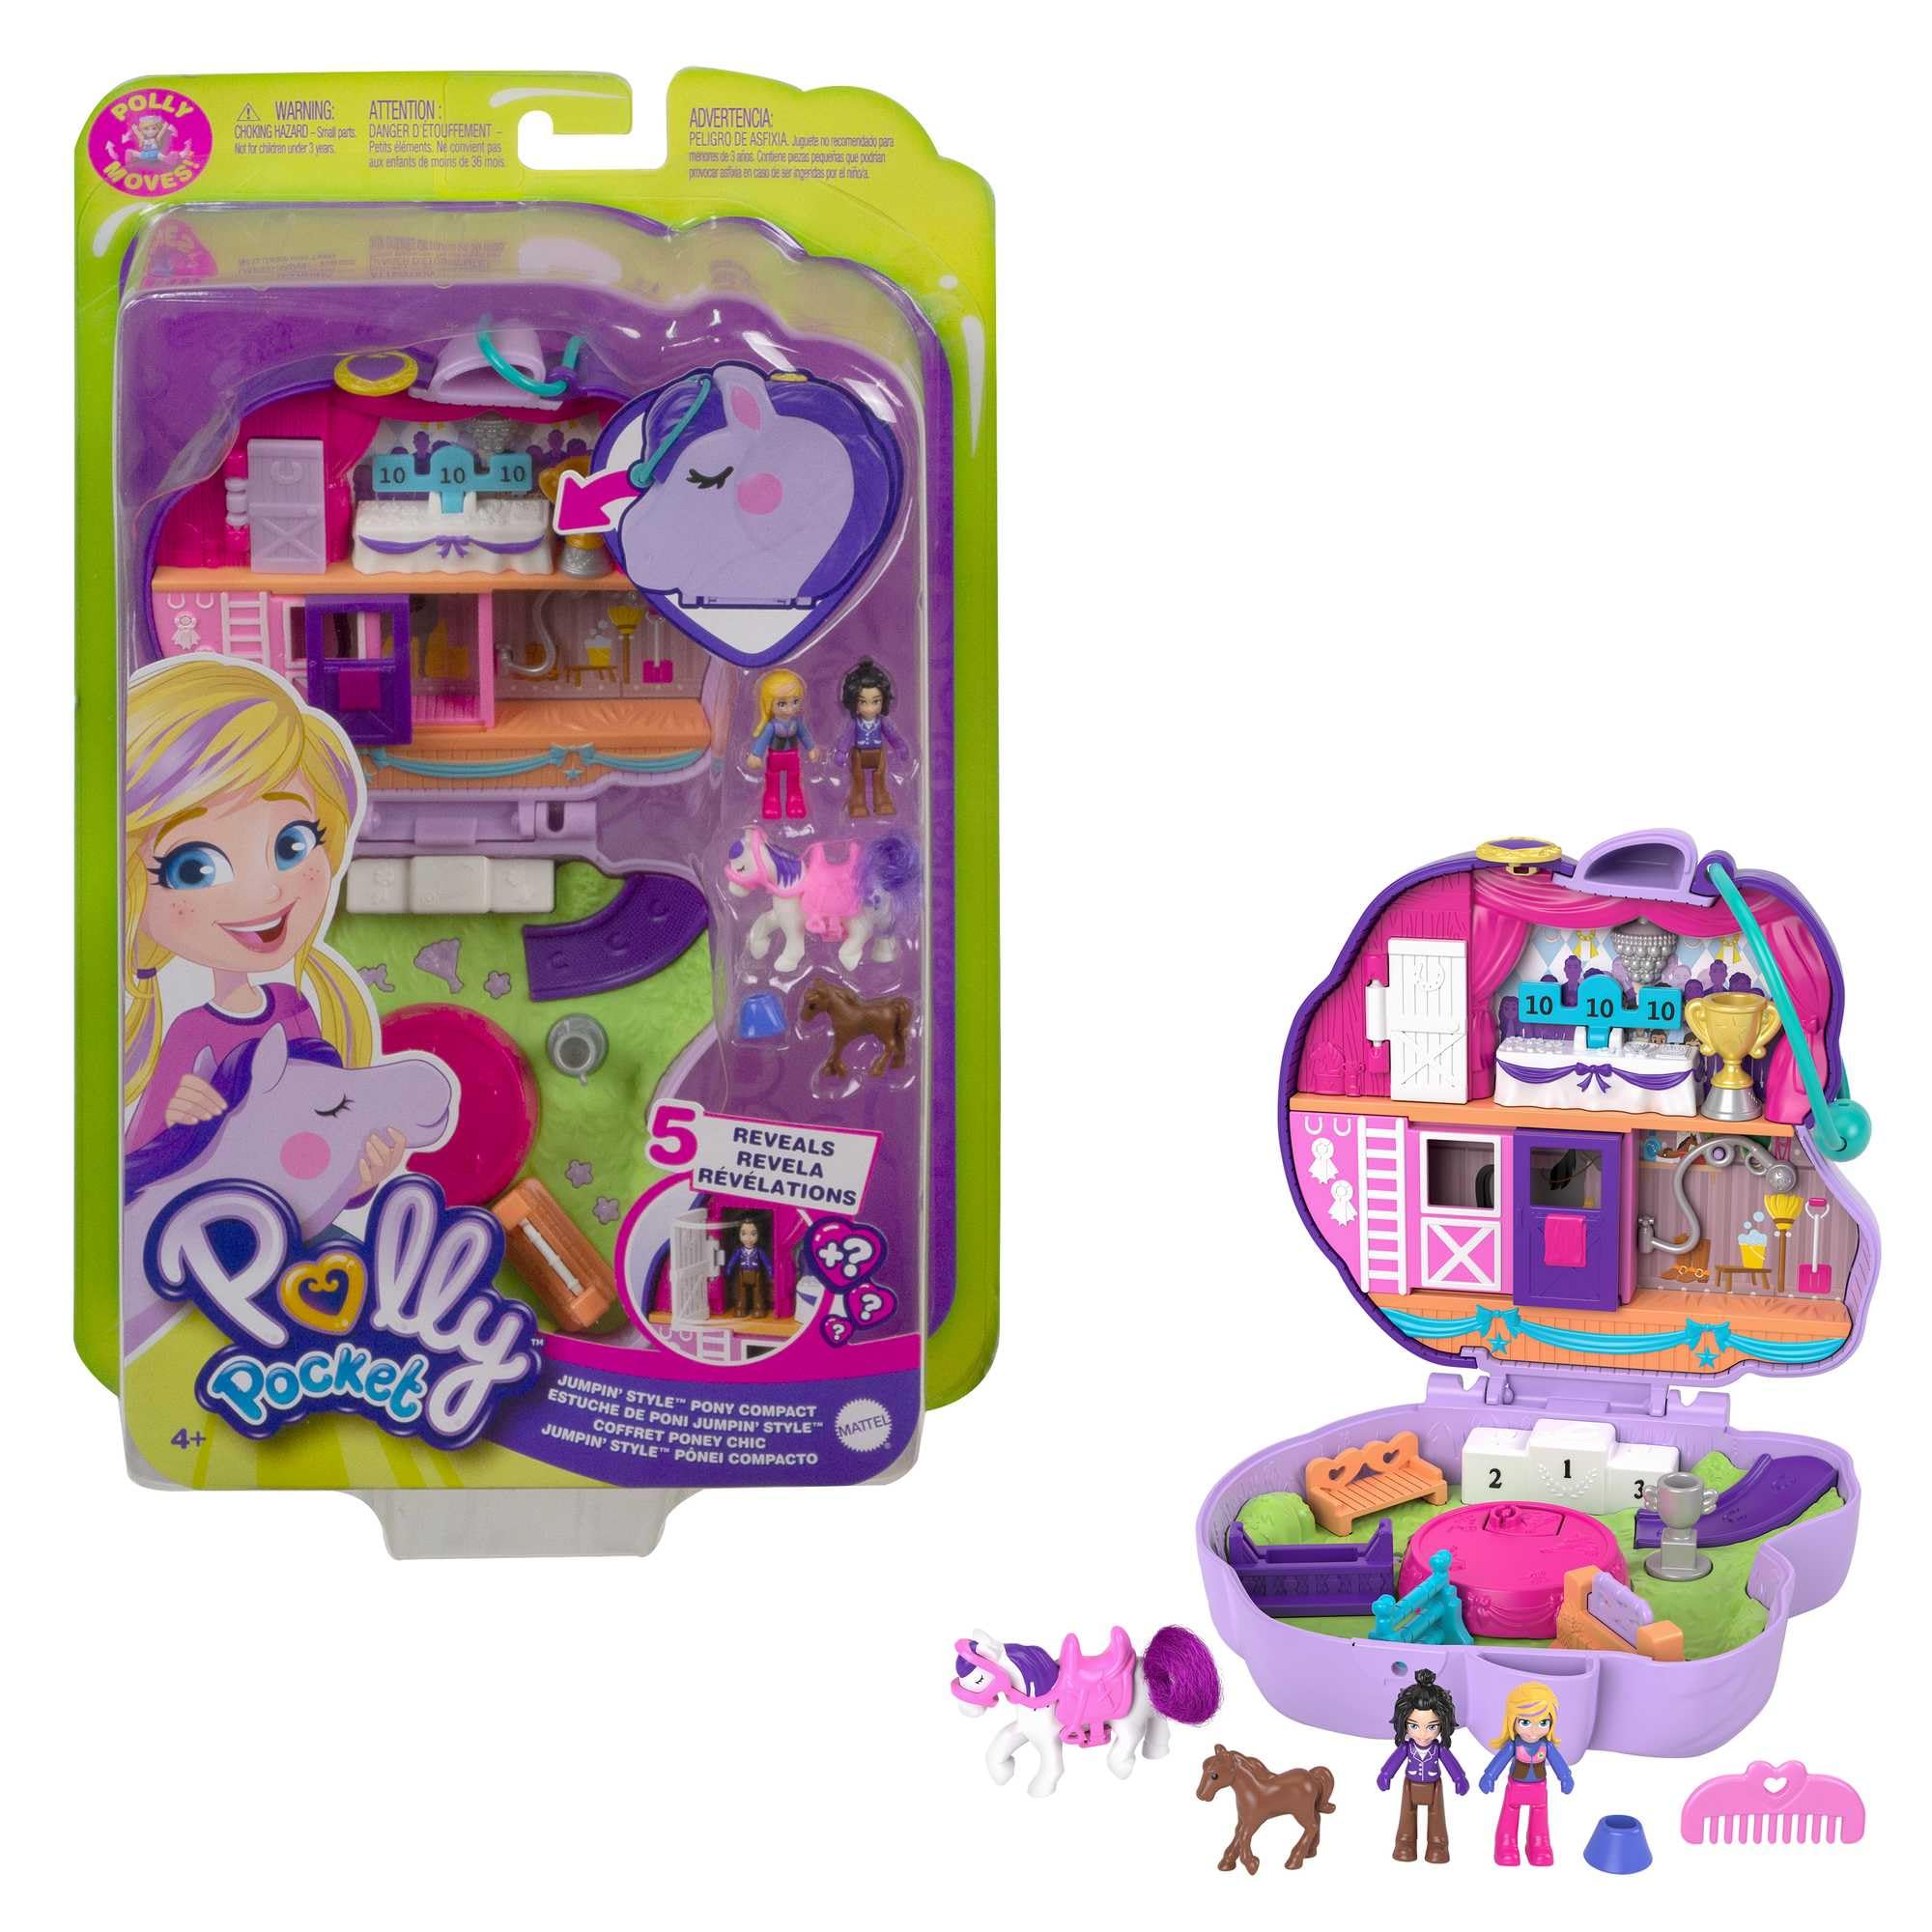 Polly Pocket compact Playset, Jumpin Style Pony with 2 Micro Dolls & Accessories, Travel Toys with Surprise Reveals